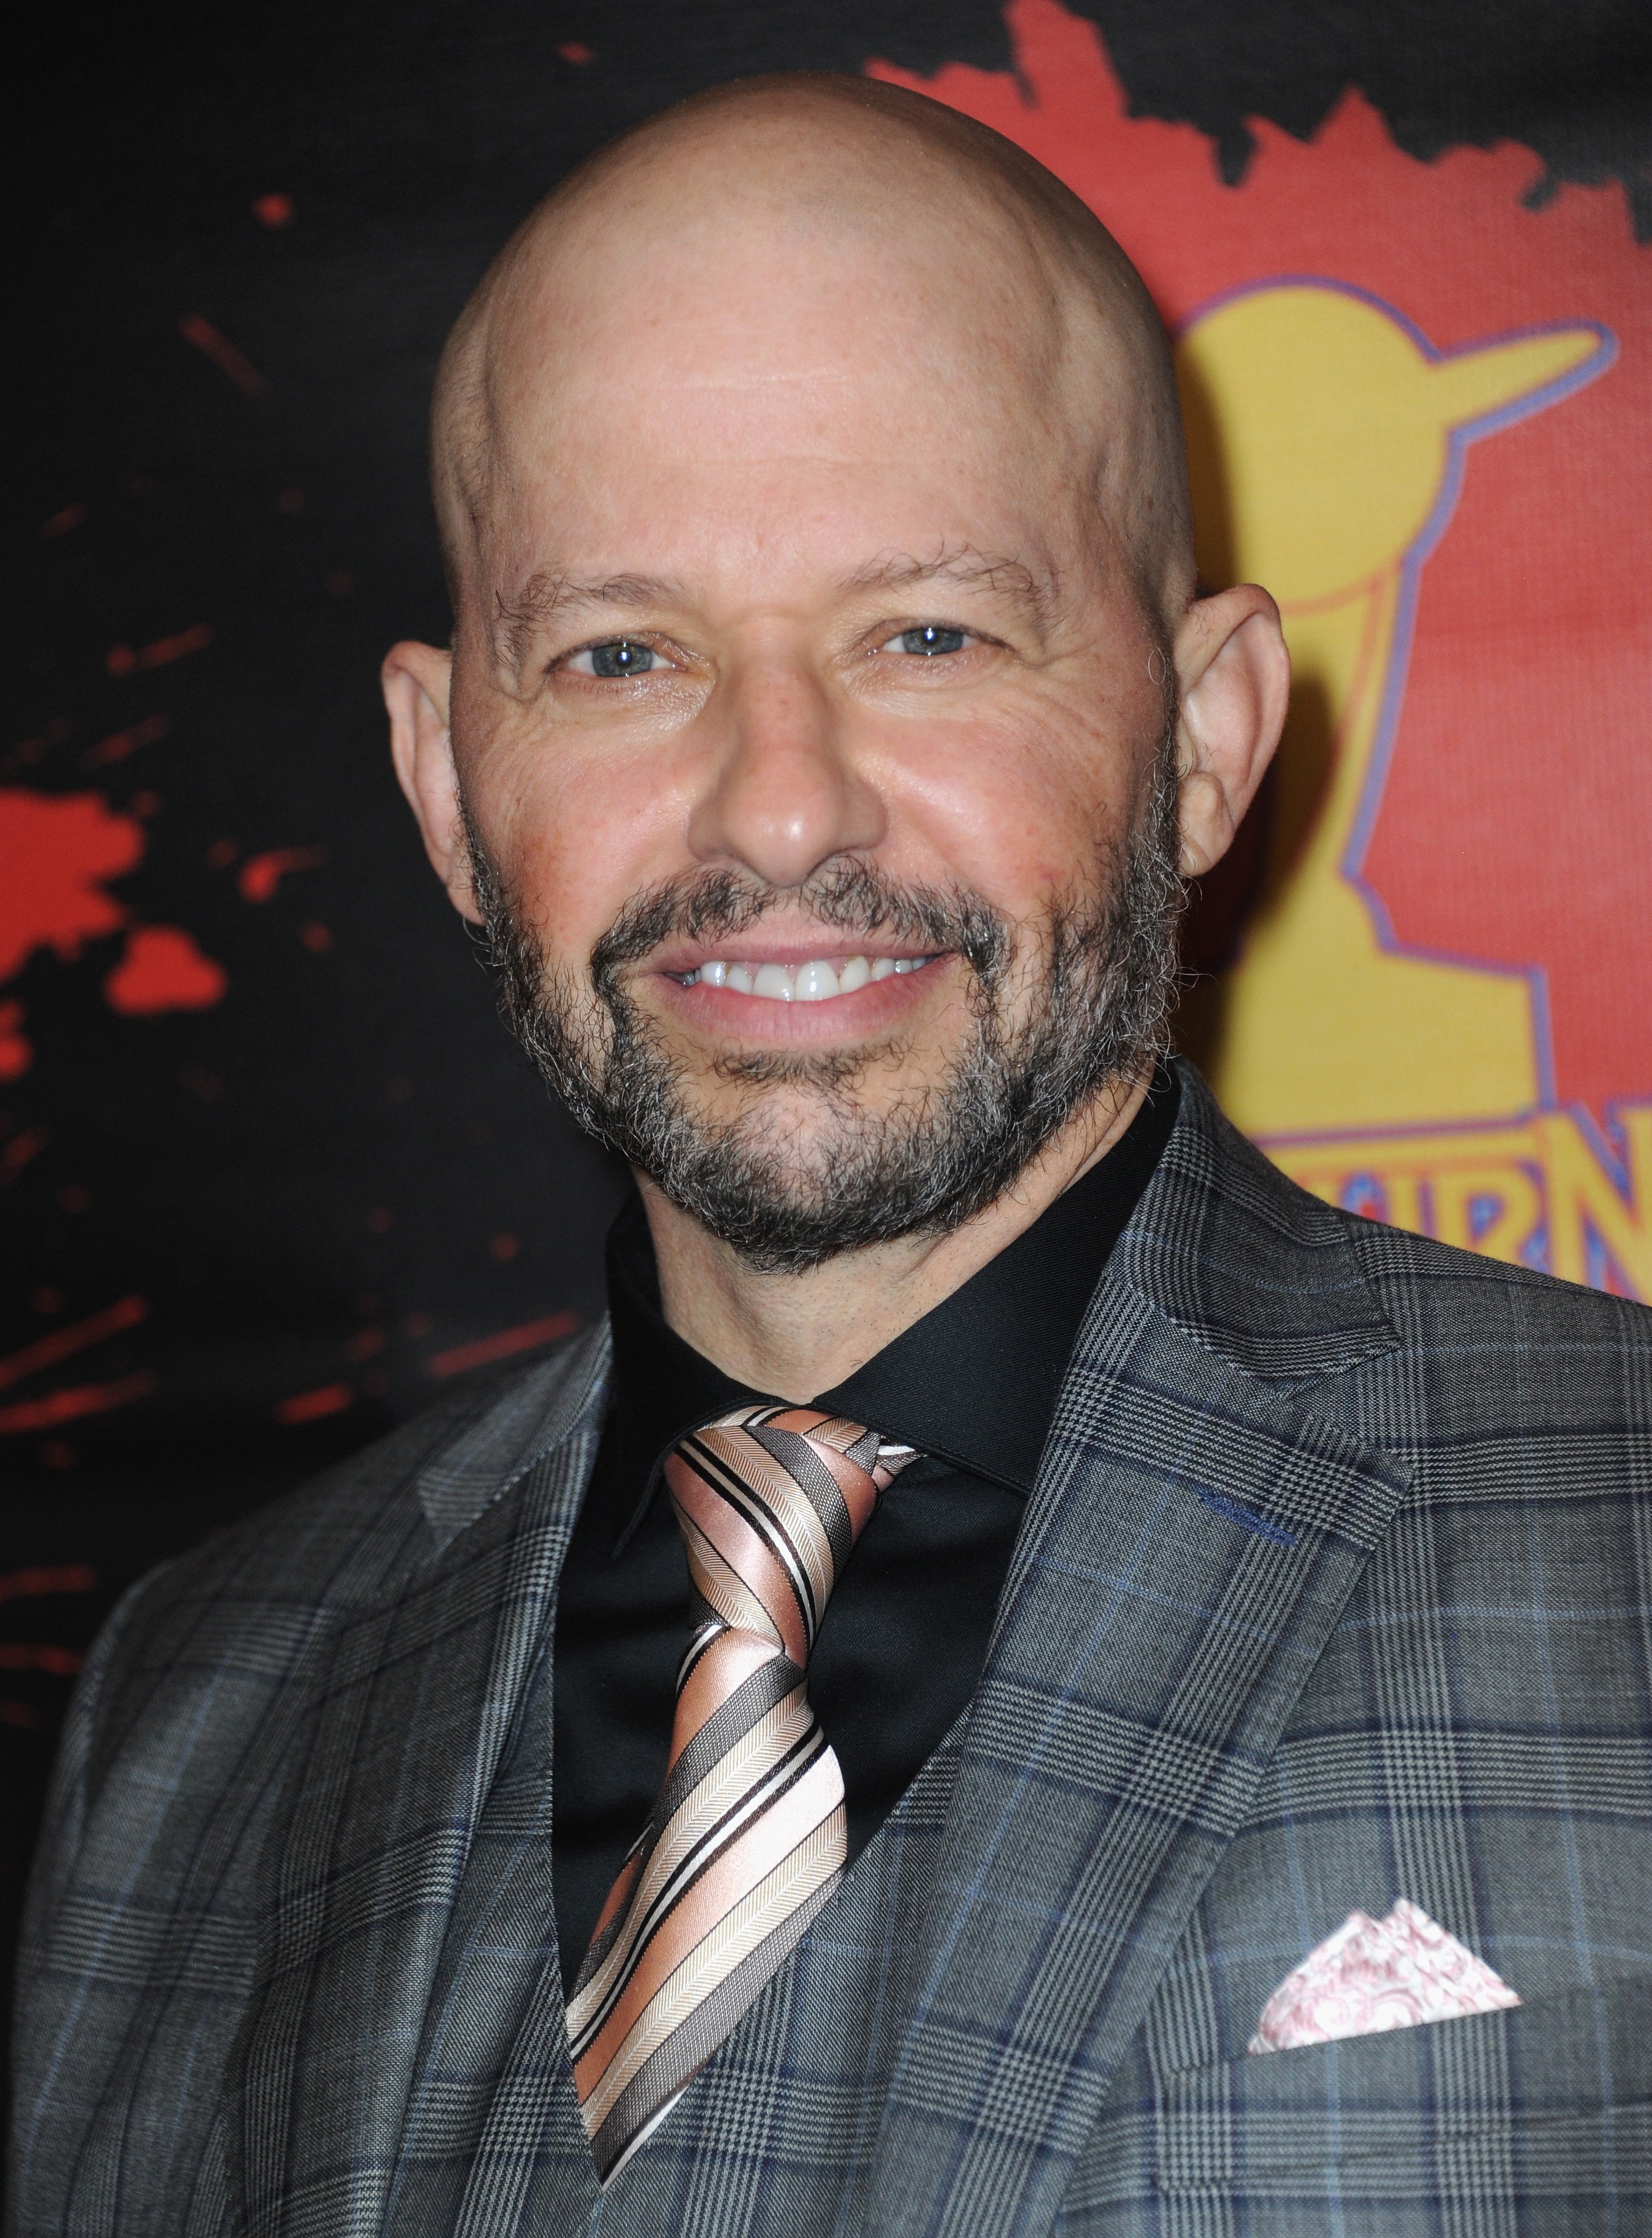 Jon Cryer arrives at The 46th Annual Saturn Awards held at Los Angeles Marriott Burbank Airport on October 26, 2021, in Burbank, California. | Source: Getty Images